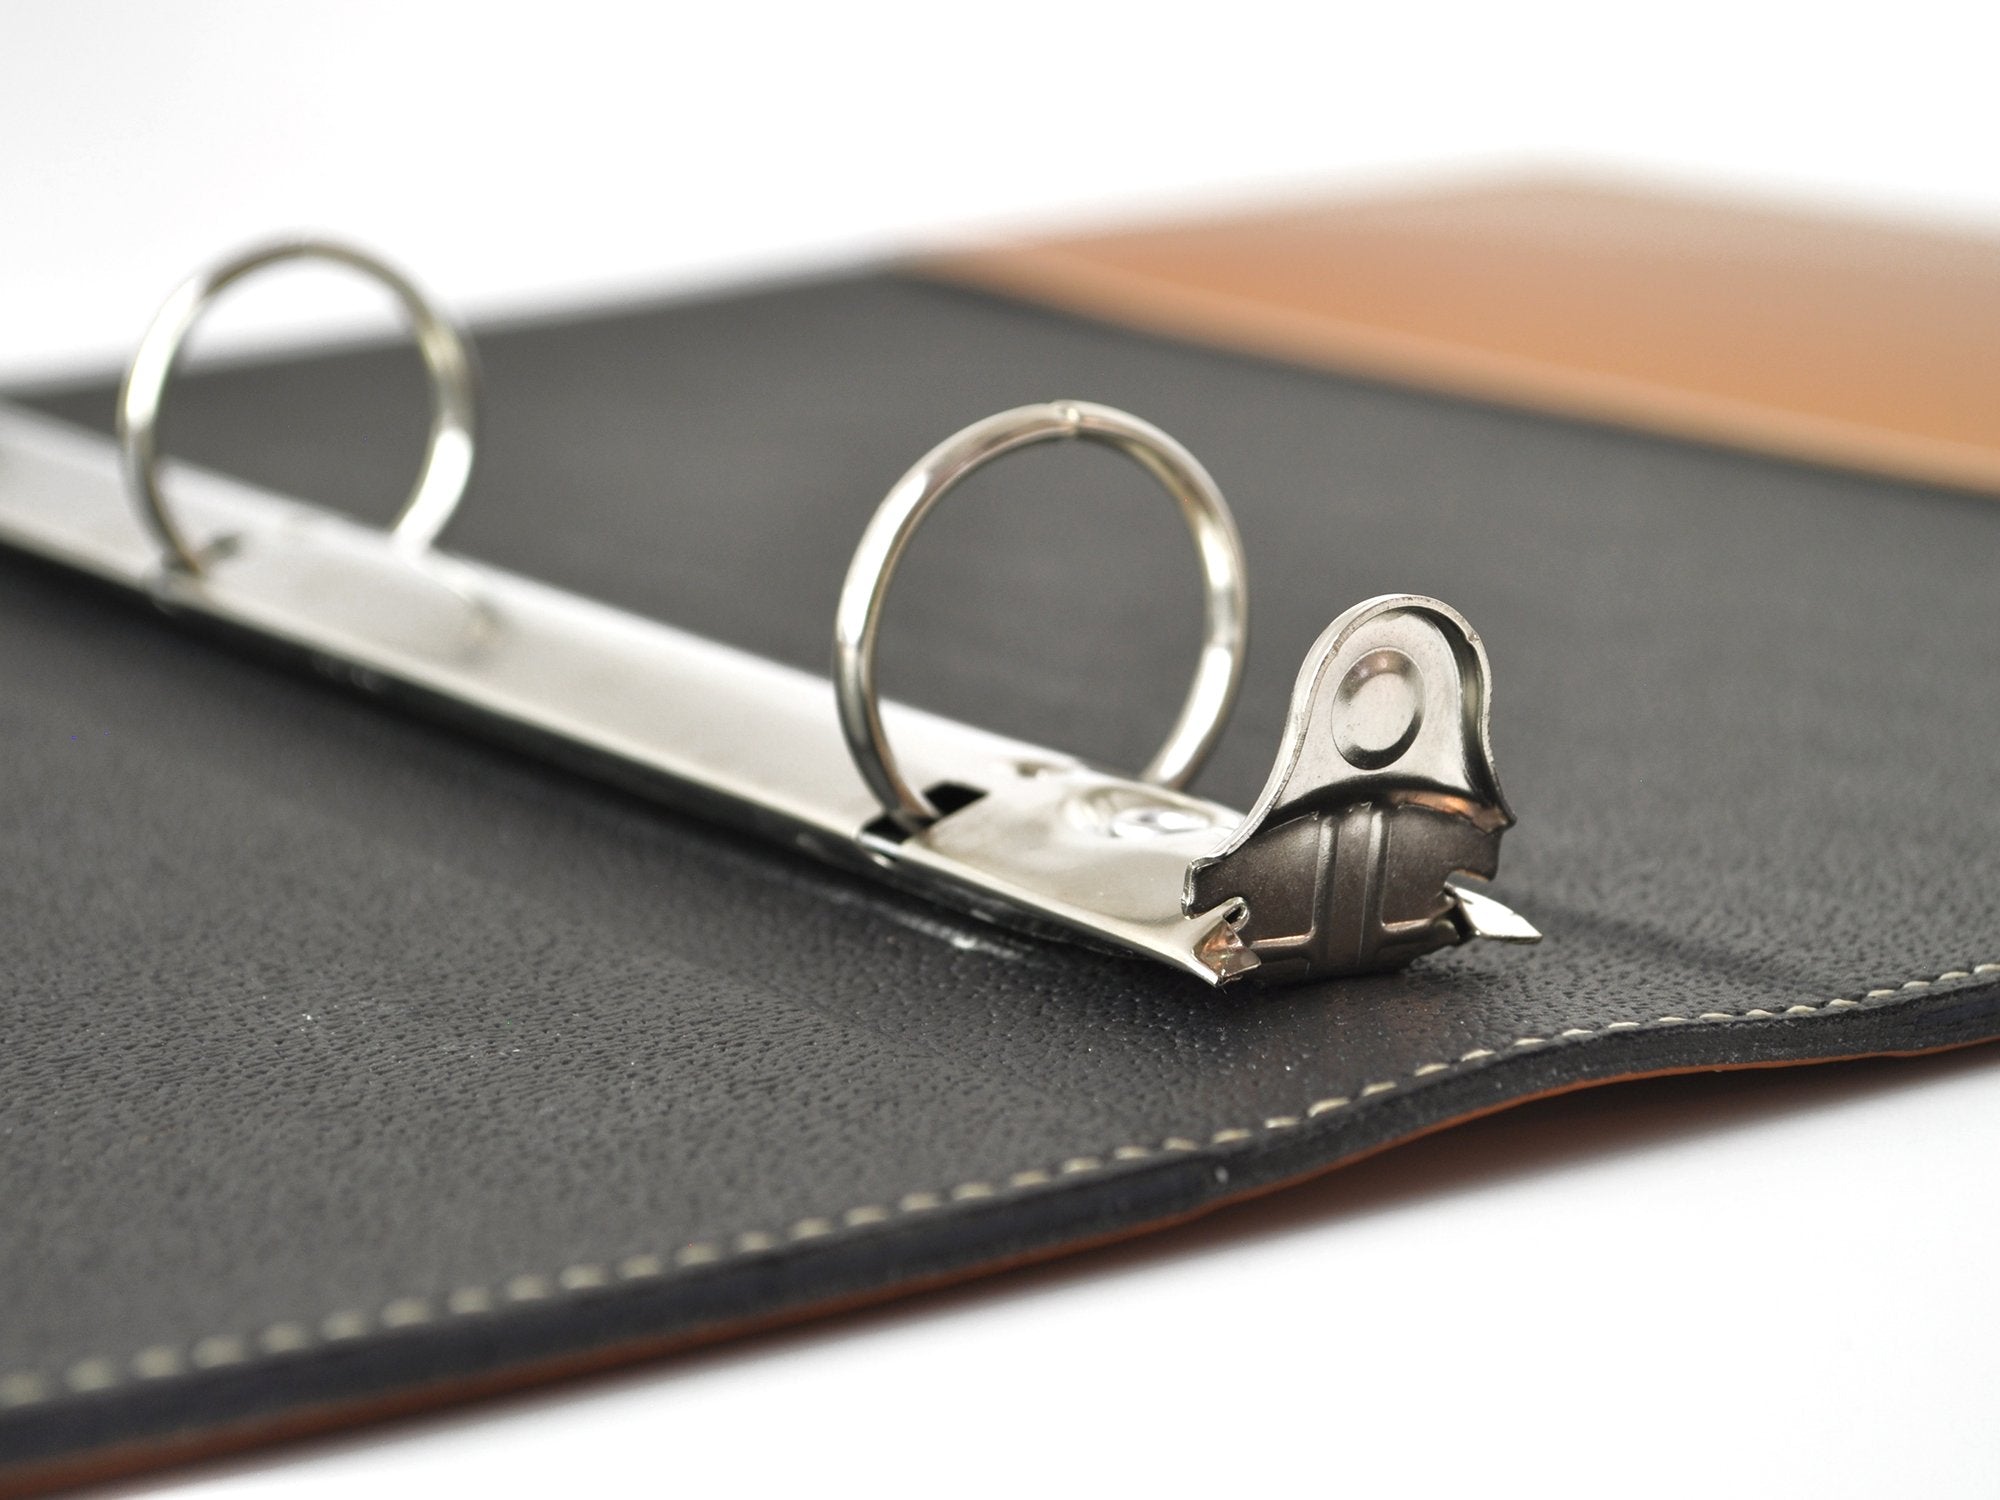 Personalized Leather 3 Ring Binder - The Langley - Holtz Leather